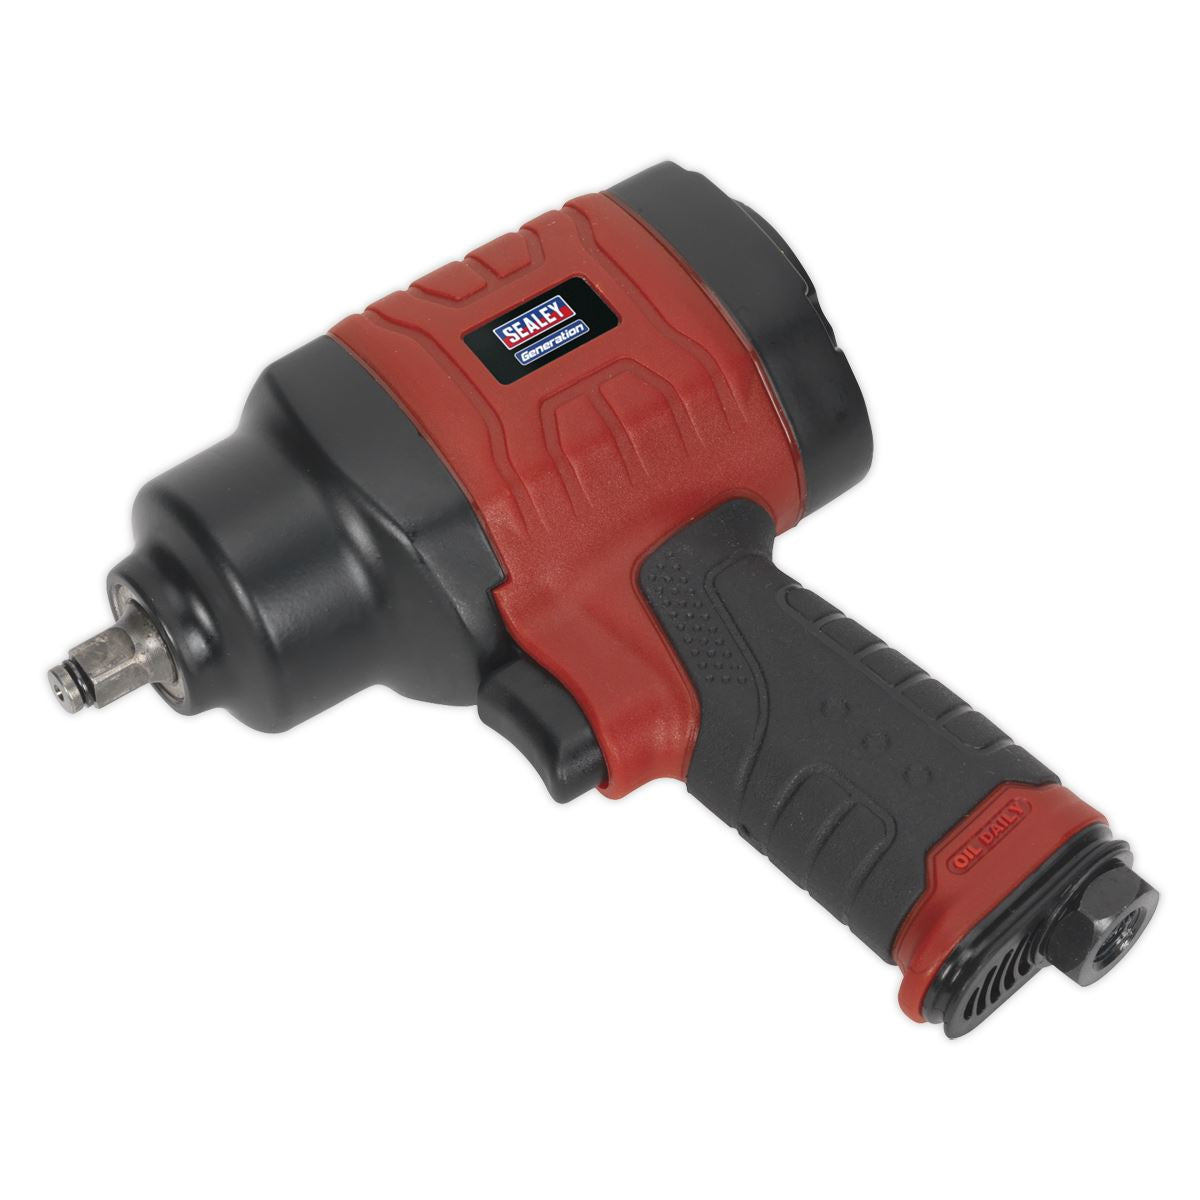 Generation Composite Air Impact Wrench 3/8"Sq Drive - Twin Hammer